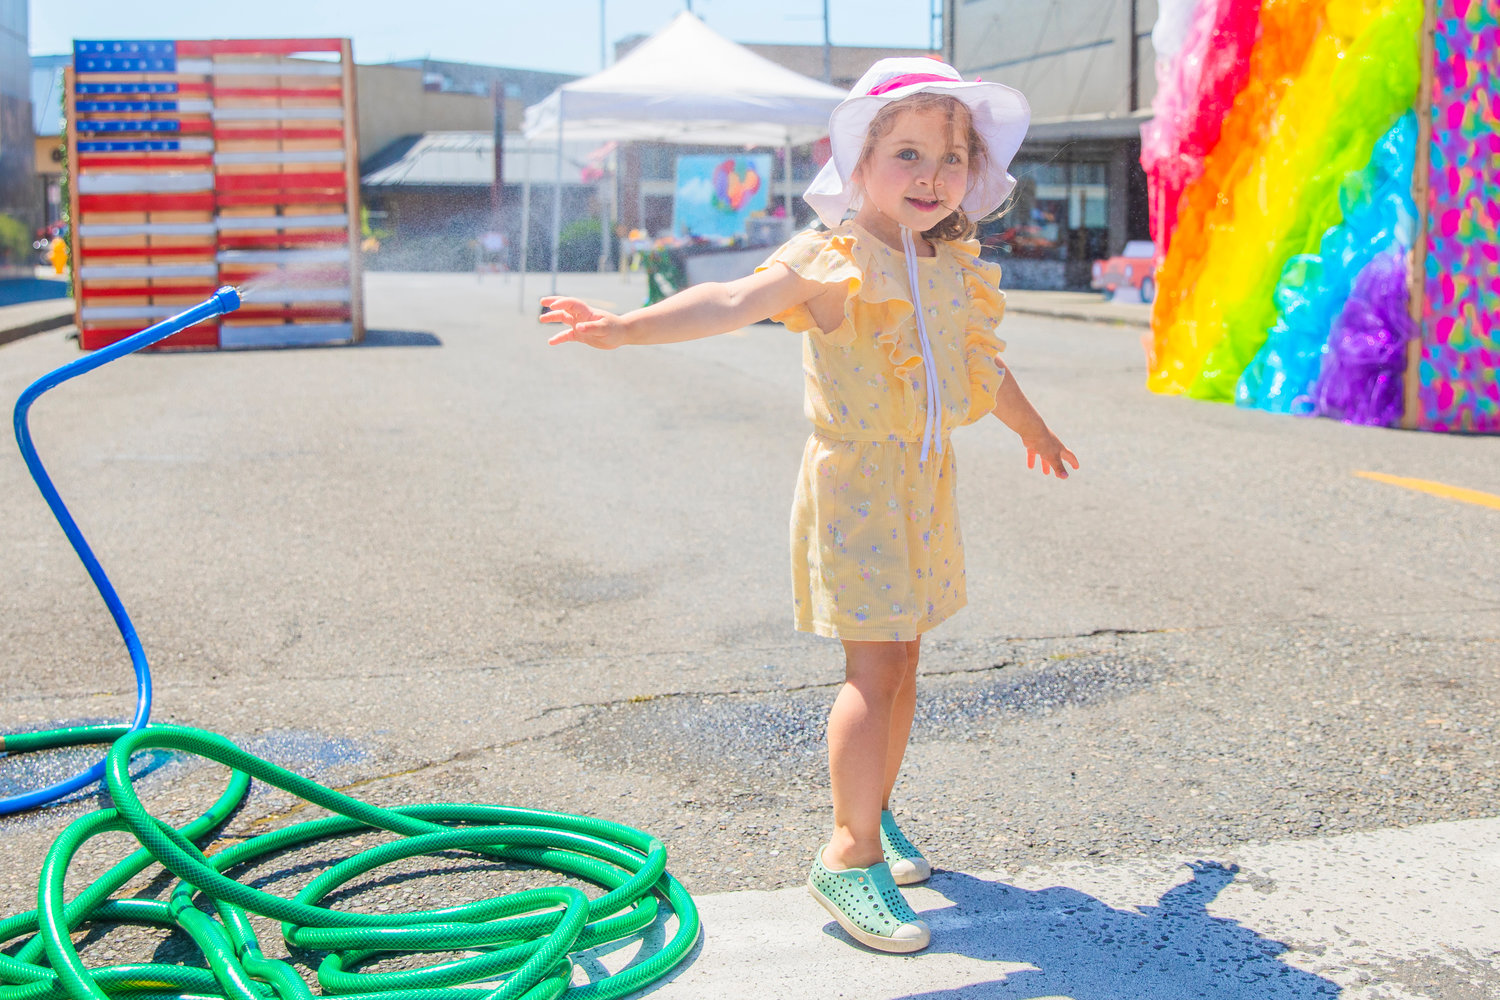 Evie Alderman, 3, smiles while cooling off in a mister during Chehalis Fest on Saturday.